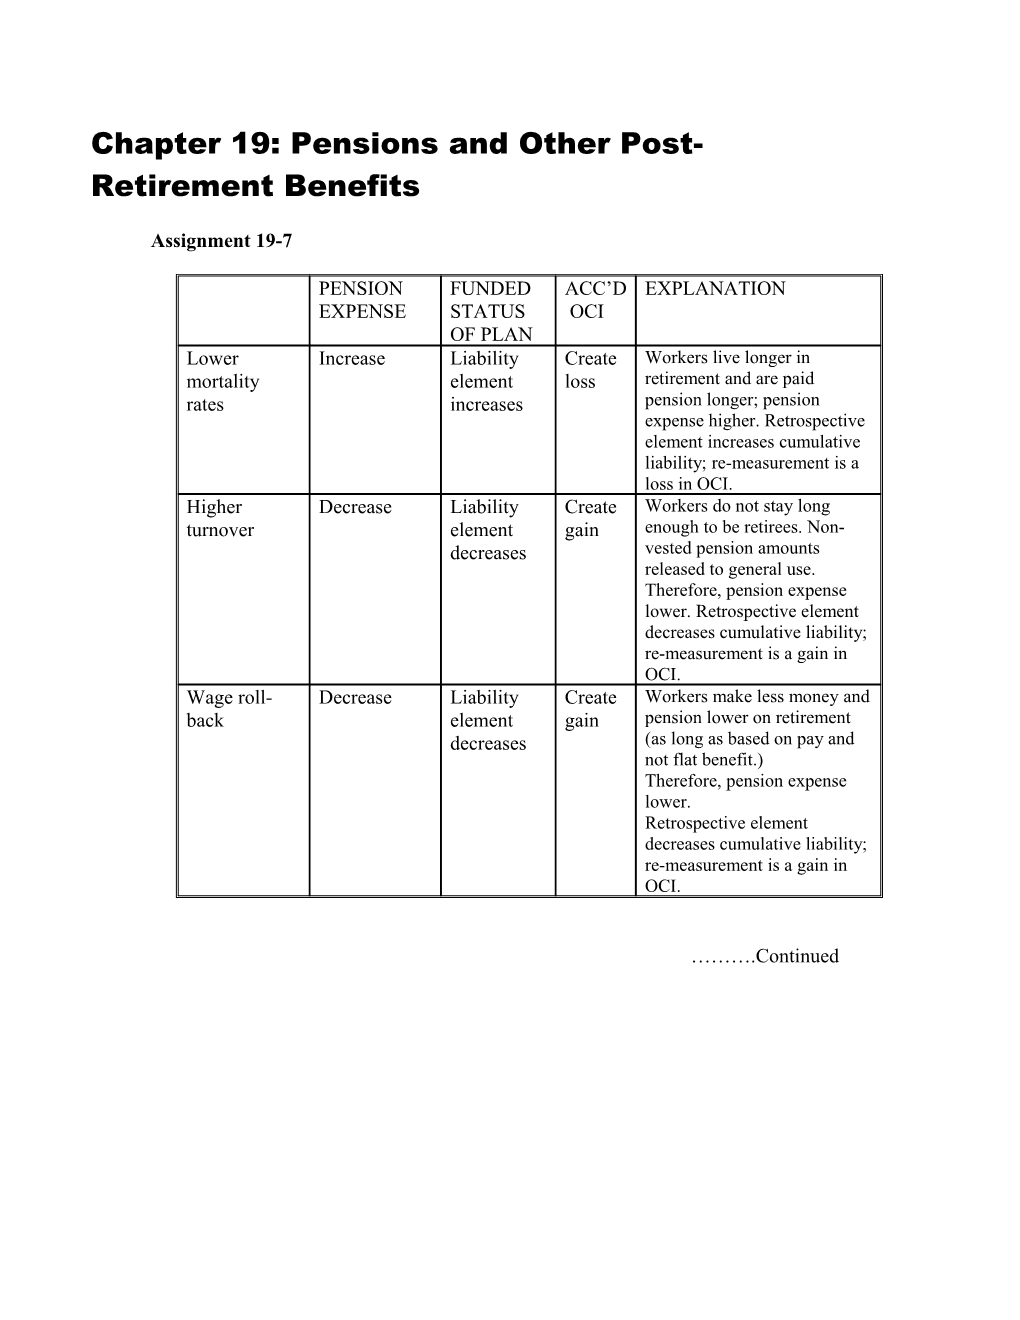 Chapter 18: Pensions and Other Post-Retirement Benefits